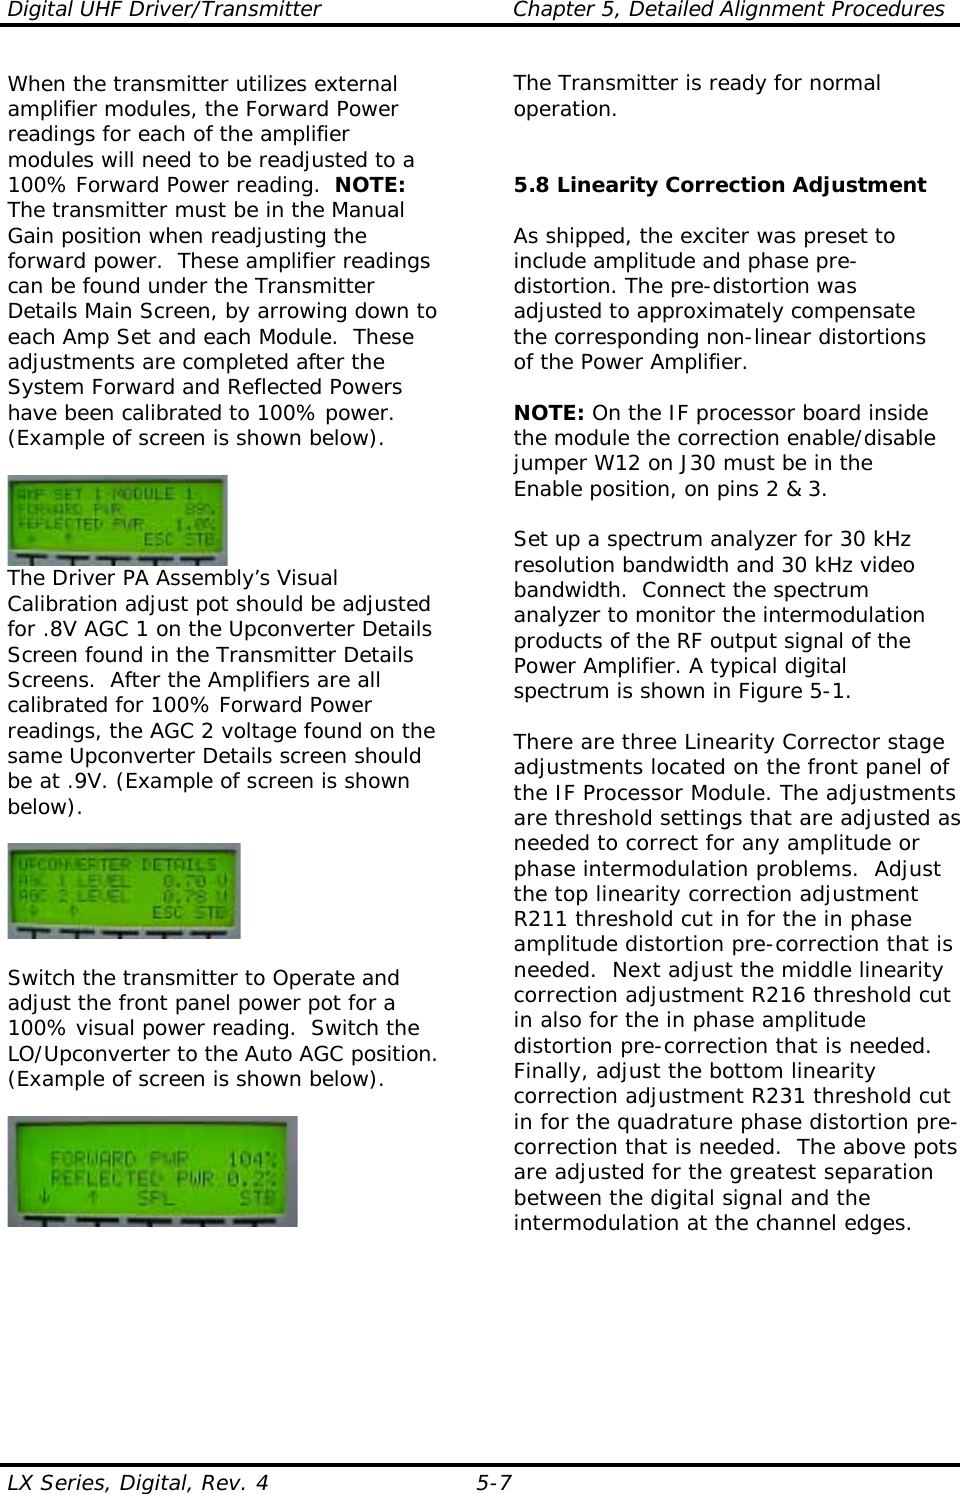 Digital UHF Driver/Transmitter  Chapter 5, Detailed Alignment Procedures  LX Series, Digital, Rev. 4  5-7 When the transmitter utilizes external amplifier modules, the Forward Power readings for each of the amplifier modules will need to be readjusted to a 100% Forward Power reading.  NOTE: The transmitter must be in the Manual Gain position when readjusting the forward power.  These amplifier readings can be found under the Transmitter Details Main Screen, by arrowing down to each Amp Set and each Module.  These adjustments are completed after the System Forward and Reflected Powers have been calibrated to 100% power. (Example of screen is shown below).   The Driver PA Assembly’s Visual Calibration adjust pot should be adjusted for .8V AGC 1 on the Upconverter Details Screen found in the Transmitter Details Screens.  After the Amplifiers are all calibrated for 100% Forward Power readings, the AGC 2 voltage found on the same Upconverter Details screen should be at .9V. (Example of screen is shown below).    Switch the transmitter to Operate and adjust the front panel power pot for a 100% visual power reading.  Switch the LO/Upconverter to the Auto AGC position.  (Example of screen is shown below).   The Transmitter is ready for normal operation.   5.8 Linearity Correction Adjustment  As shipped, the exciter was preset to include amplitude and phase pre-distortion. The pre-distortion was adjusted to approximately compensate the corresponding non-linear distortions of the Power Amplifier.  NOTE: On the IF processor board inside the module the correction enable/disable jumper W12 on J30 must be in the Enable position, on pins 2 &amp; 3.  Set up a spectrum analyzer for 30 kHz resolution bandwidth and 30 kHz video bandwidth.  Connect the spectrum analyzer to monitor the intermodulation products of the RF output signal of the Power Amplifier. A typical digital spectrum is shown in Figure 5-1.  There are three Linearity Corrector stage adjustments located on the front panel of the IF Processor Module. The adjustments are threshold settings that are adjusted as needed to correct for any amplitude or phase intermodulation problems.  Adjust the top linearity correction adjustment R211 threshold cut in for the in phase amplitude distortion pre-correction that is needed.  Next adjust the middle linearity correction adjustment R216 threshold cut in also for the in phase amplitude distortion pre-correction that is needed.  Finally, adjust the bottom linearity correction adjustment R231 threshold cut in for the quadrature phase distortion pre-correction that is needed.  The above pots are adjusted for the greatest separation between the digital signal and the intermodulation at the channel edges.  